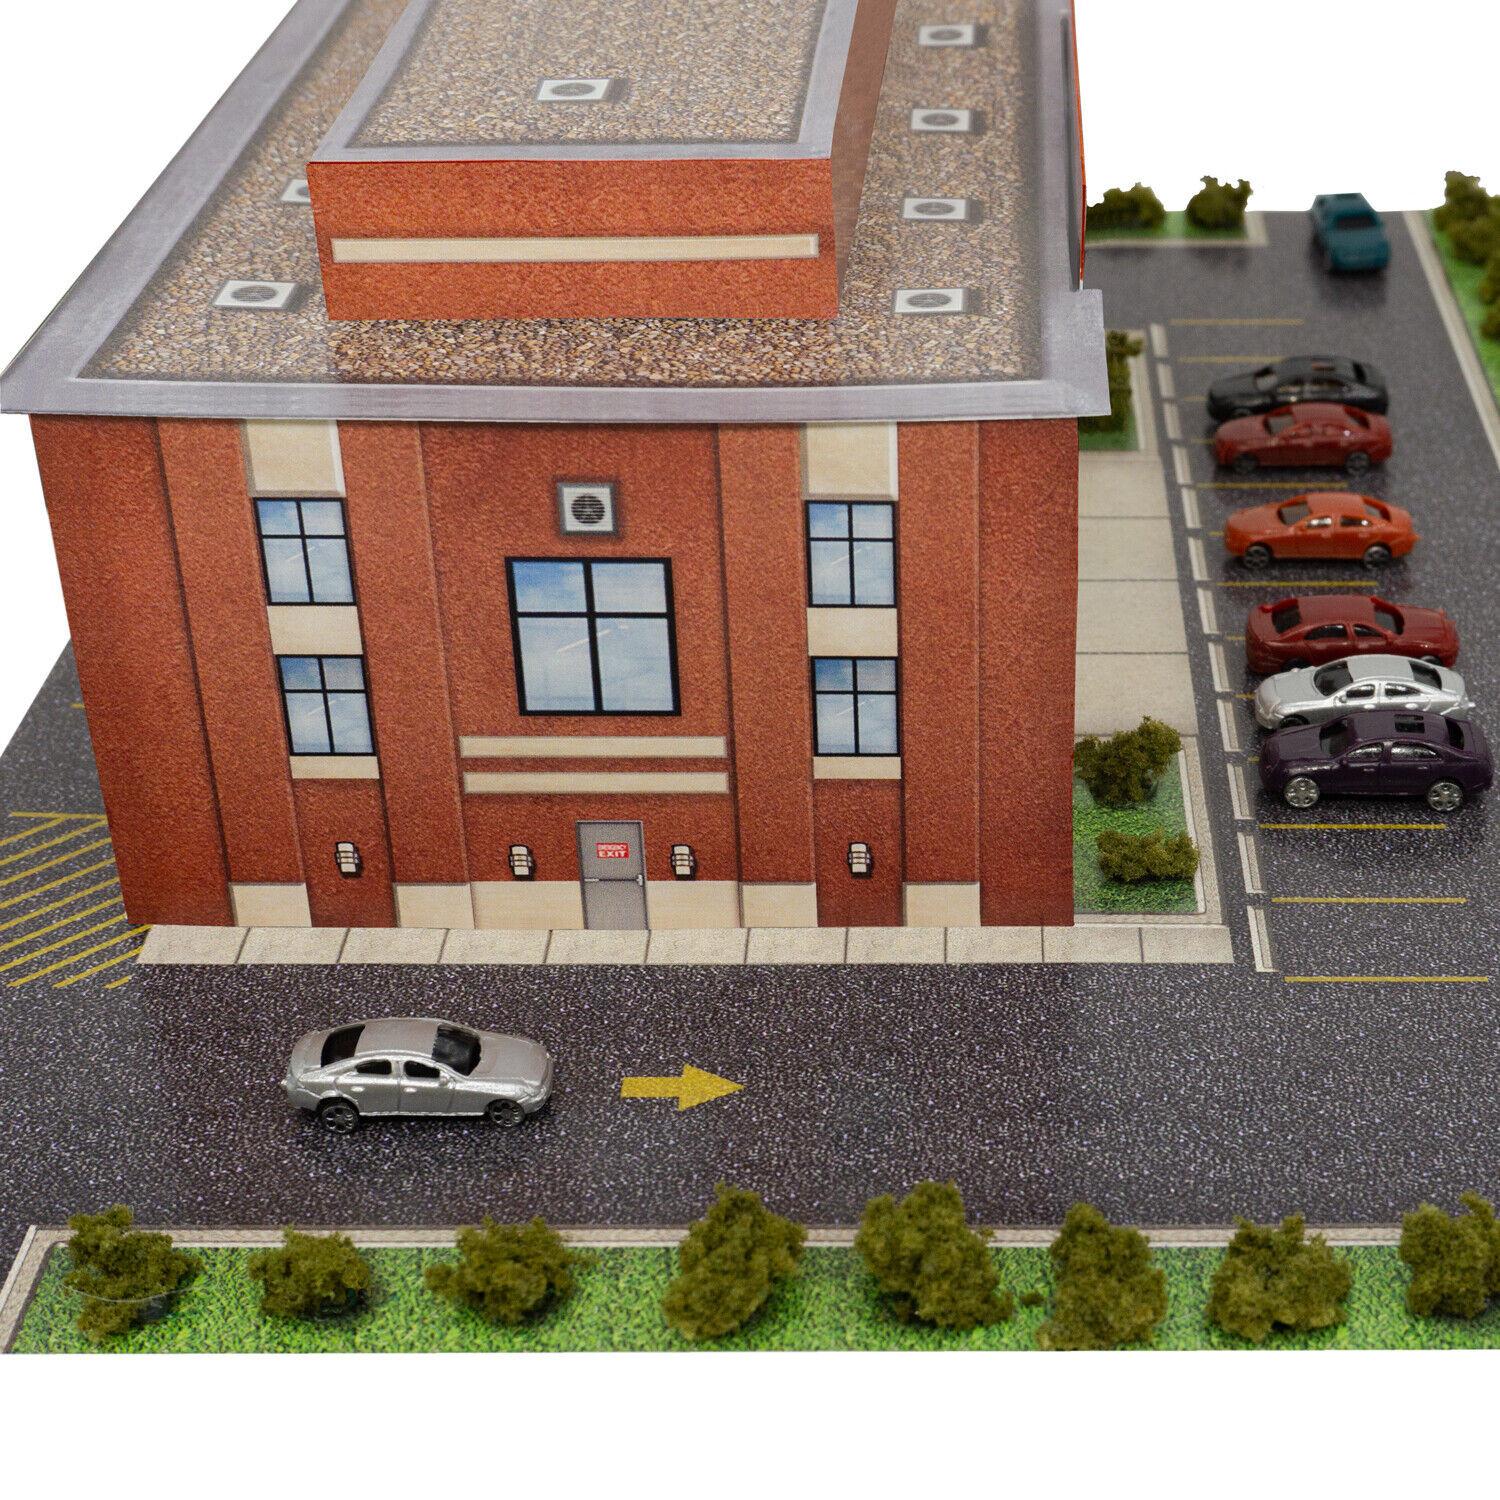 BK 2104 1:220 Scale "Xtreme Performance Building" Photo Real Scale Building Kit